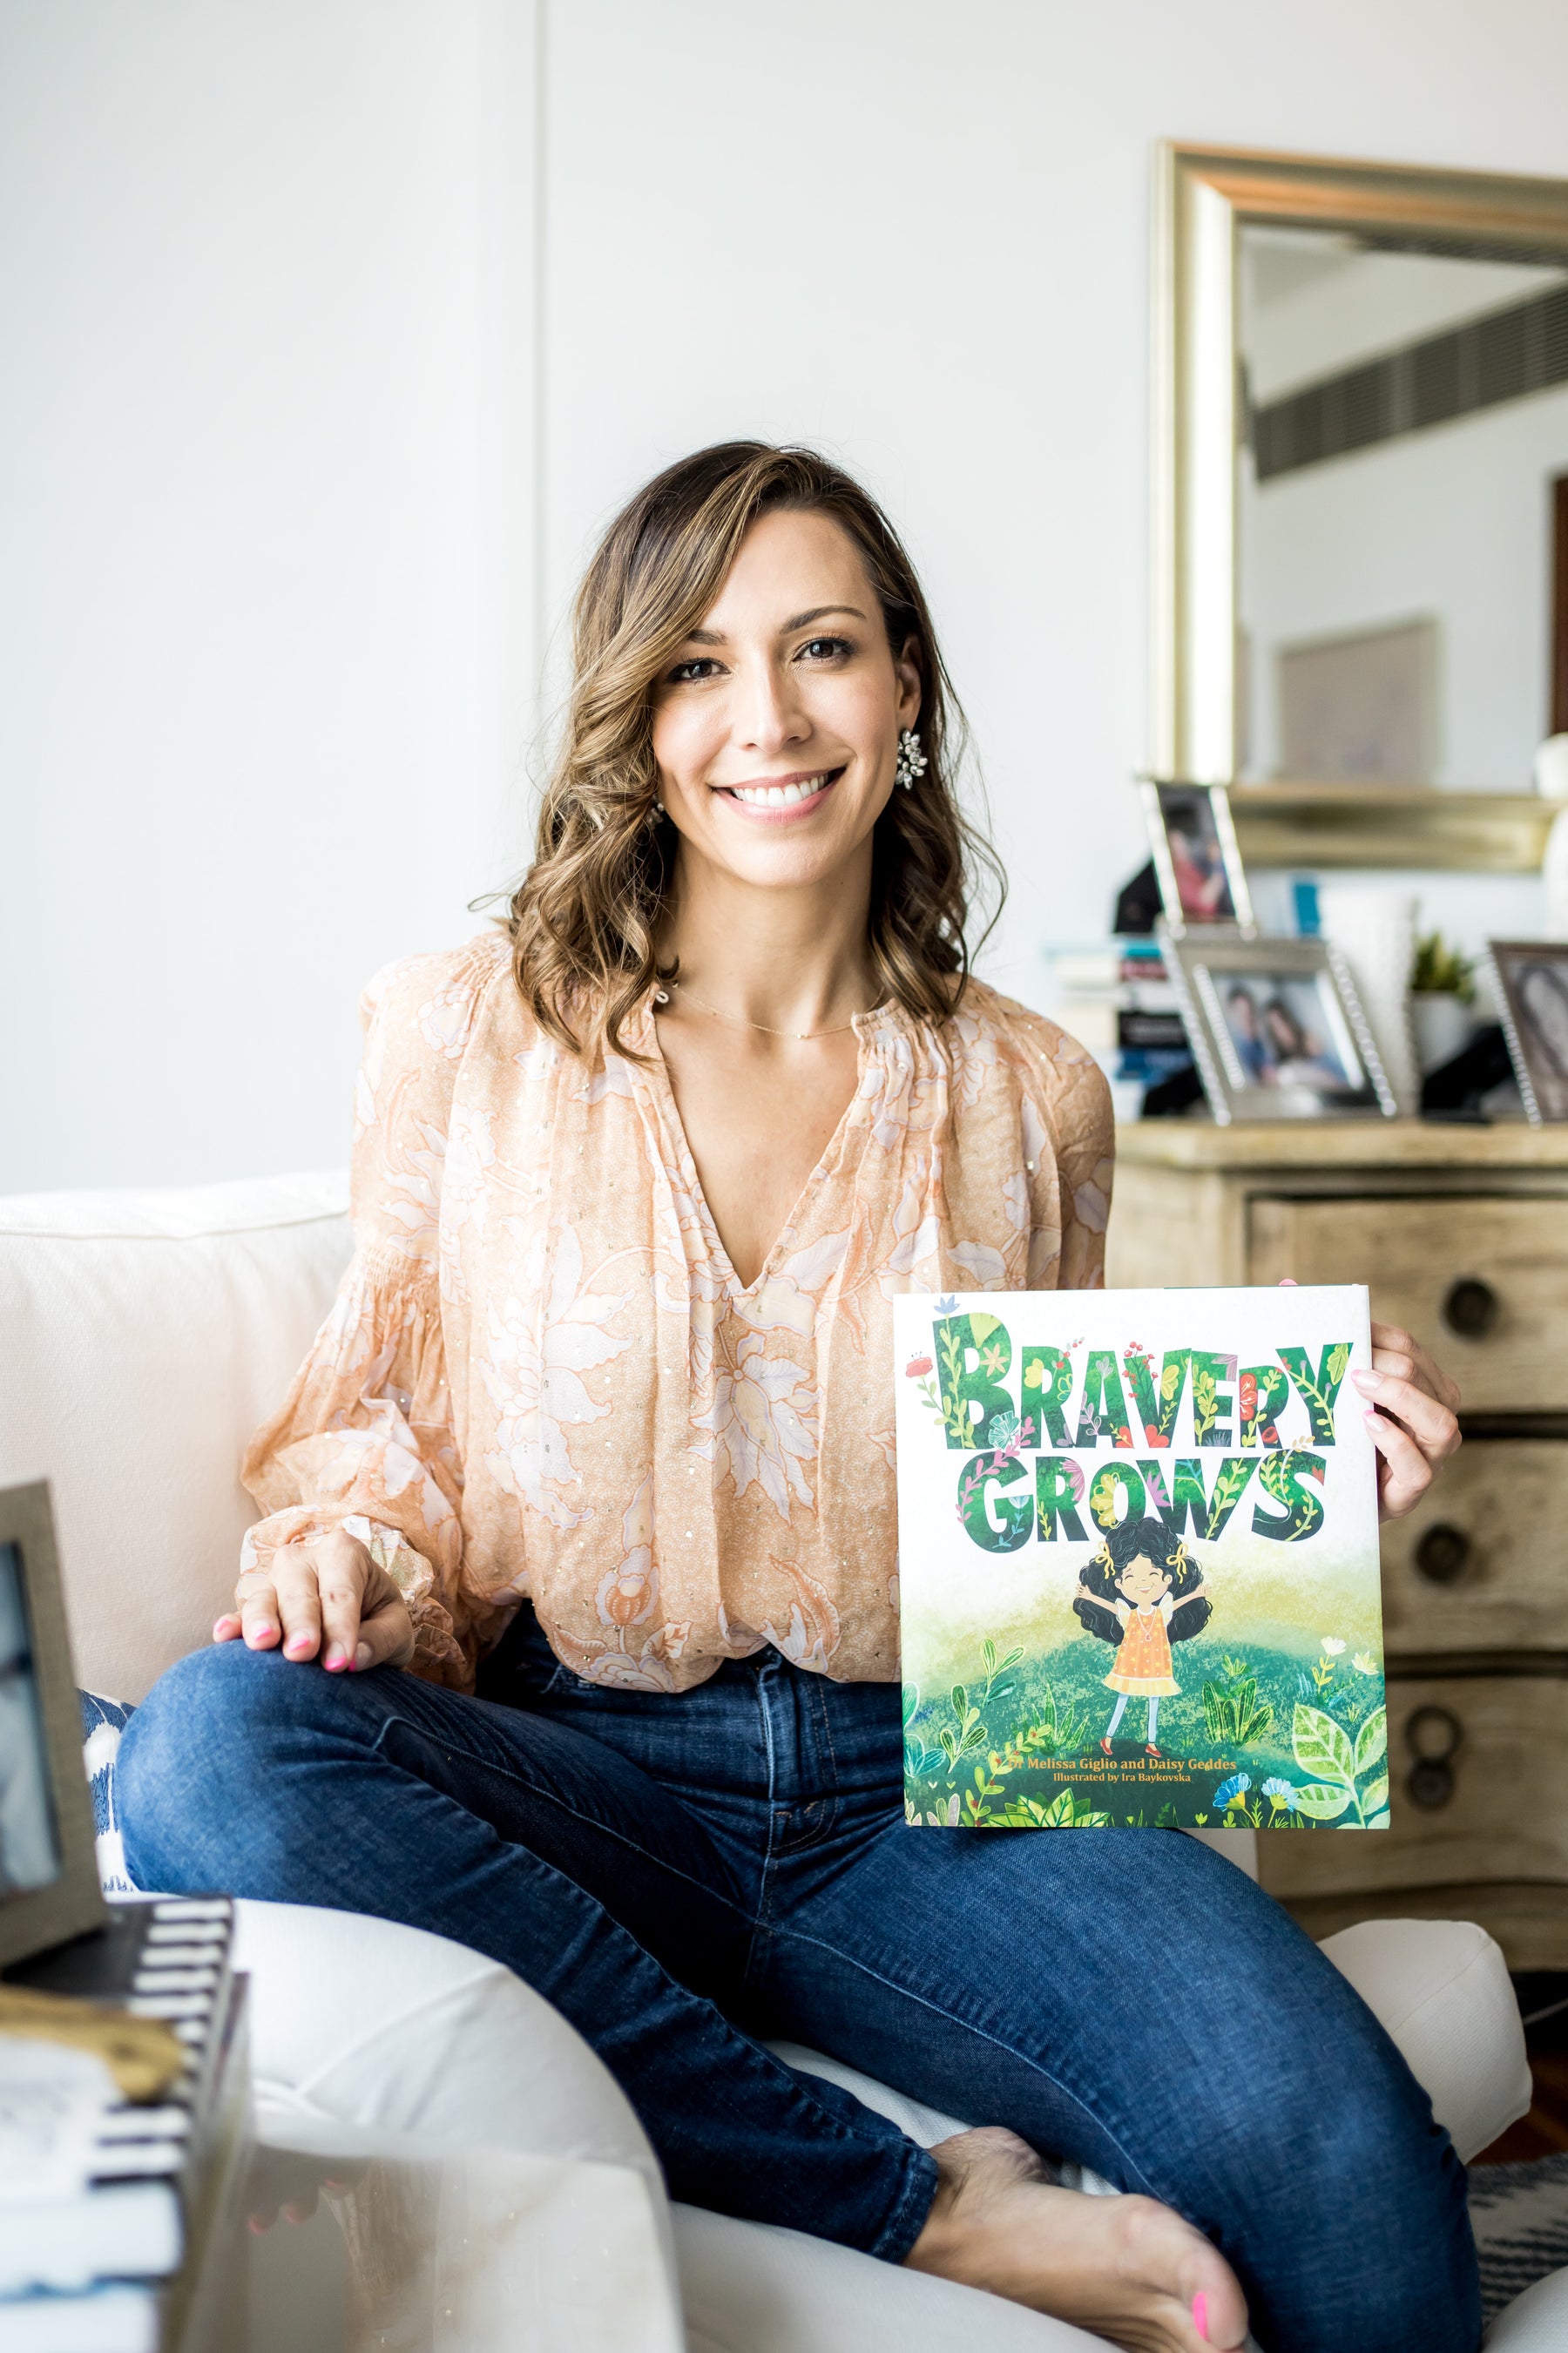 An Interview With Melissa: Co-Author of Bravery Grows